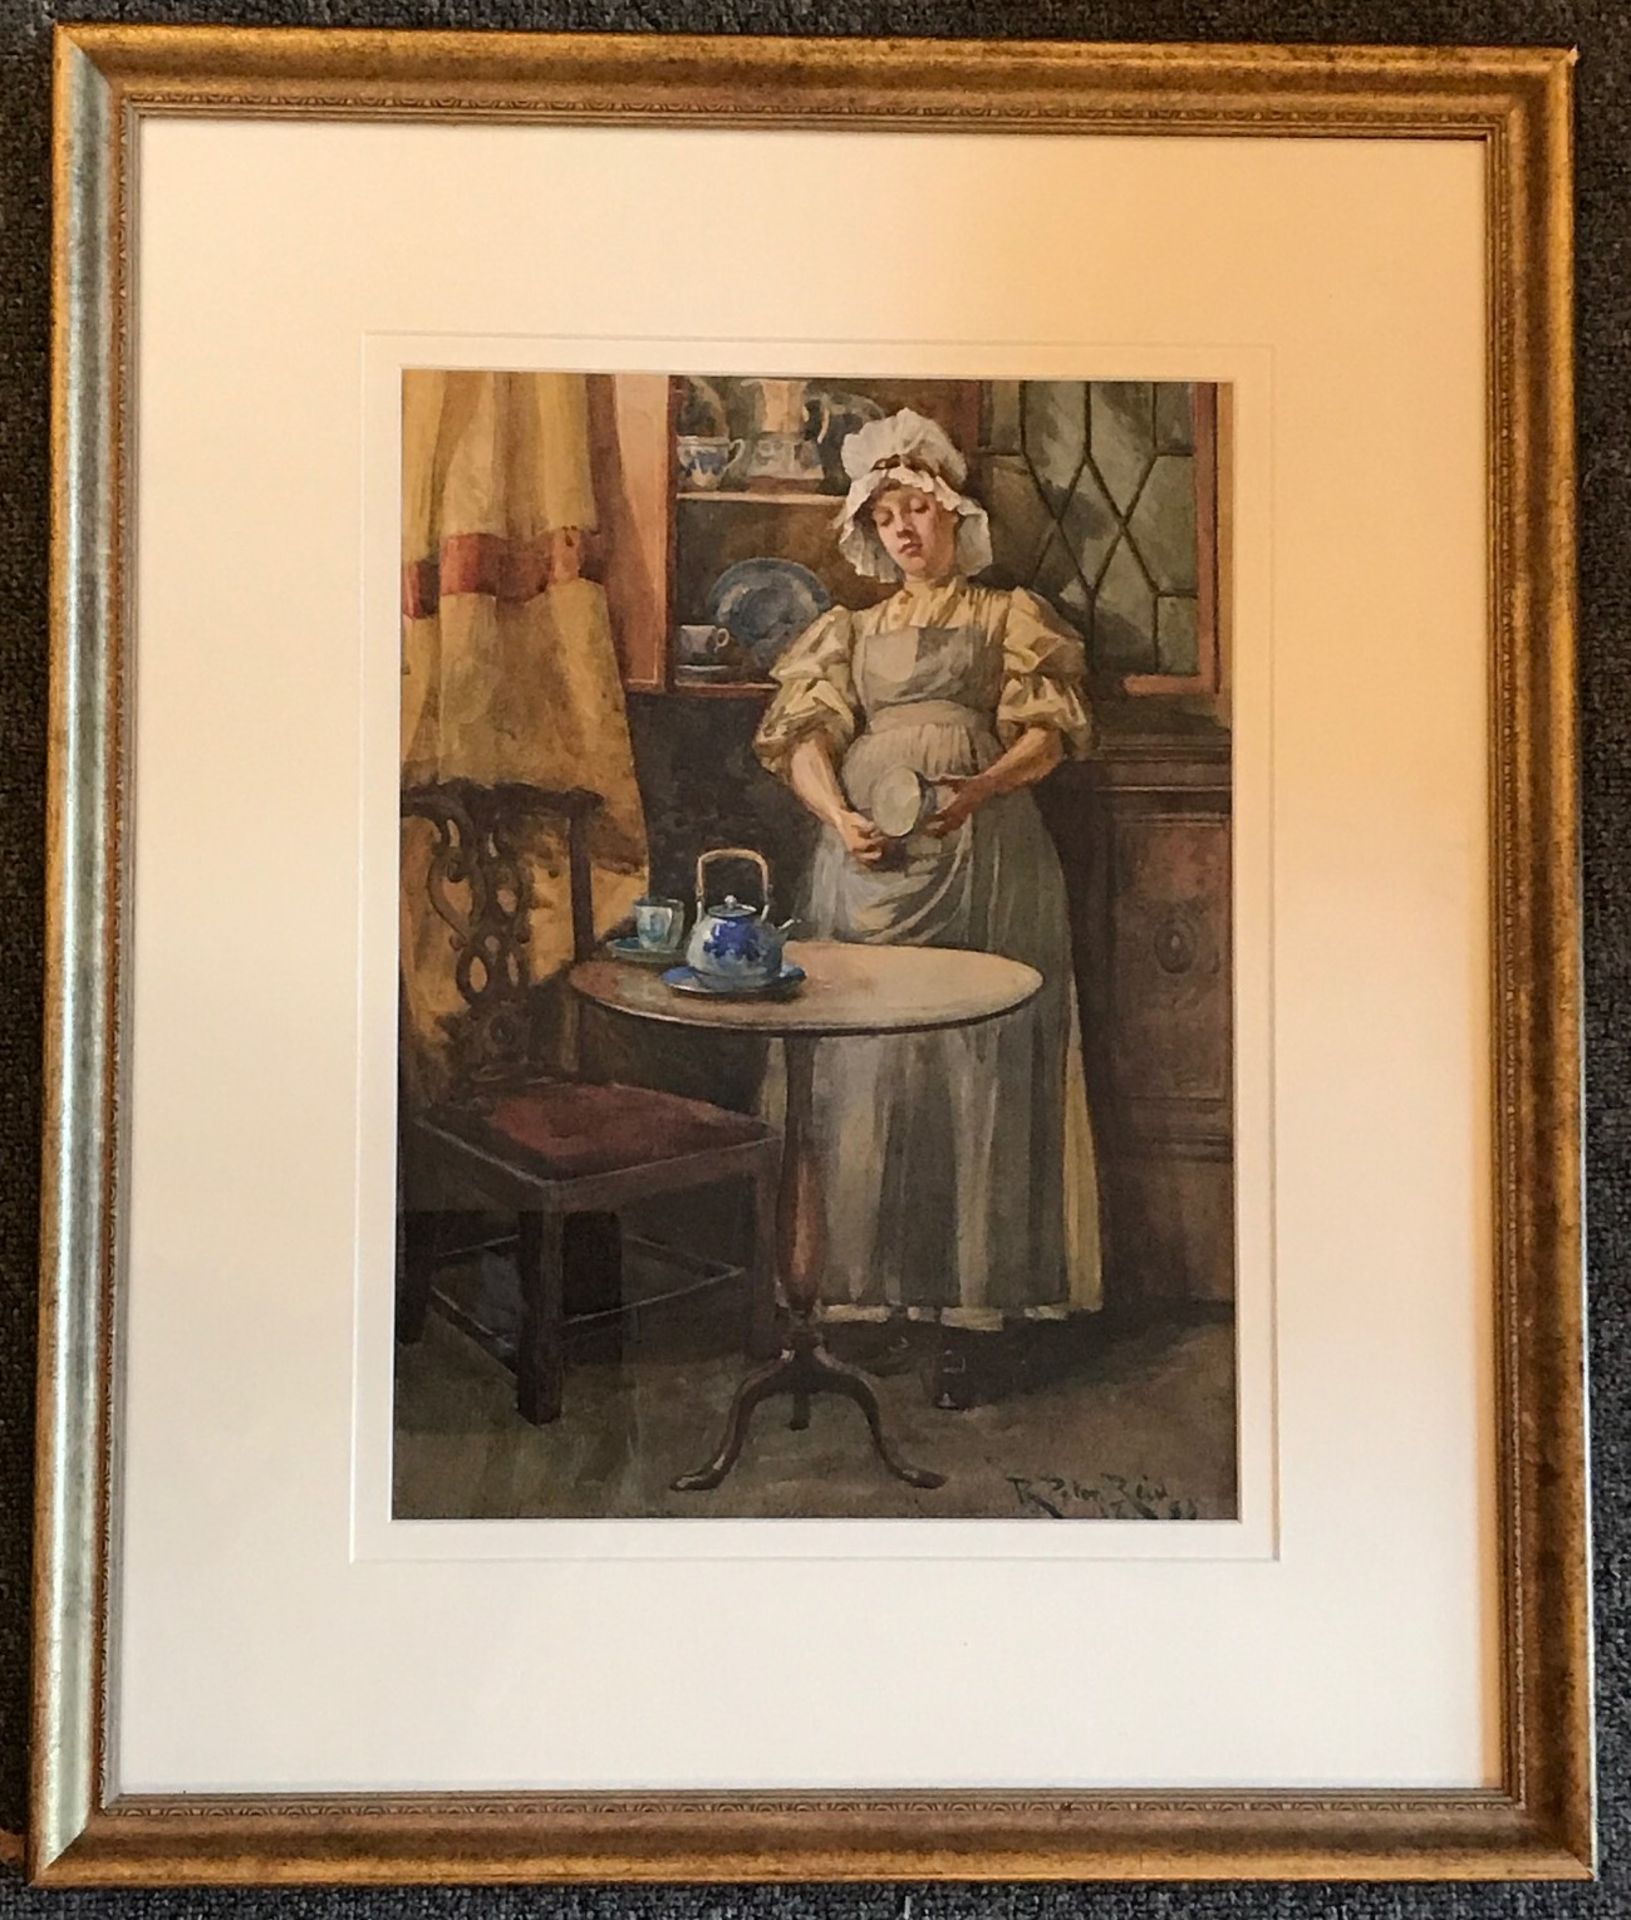 kitchen maid Original watercolour painting by Scottish artist Robert Payton Reid A.R.S.A - Image 2 of 4